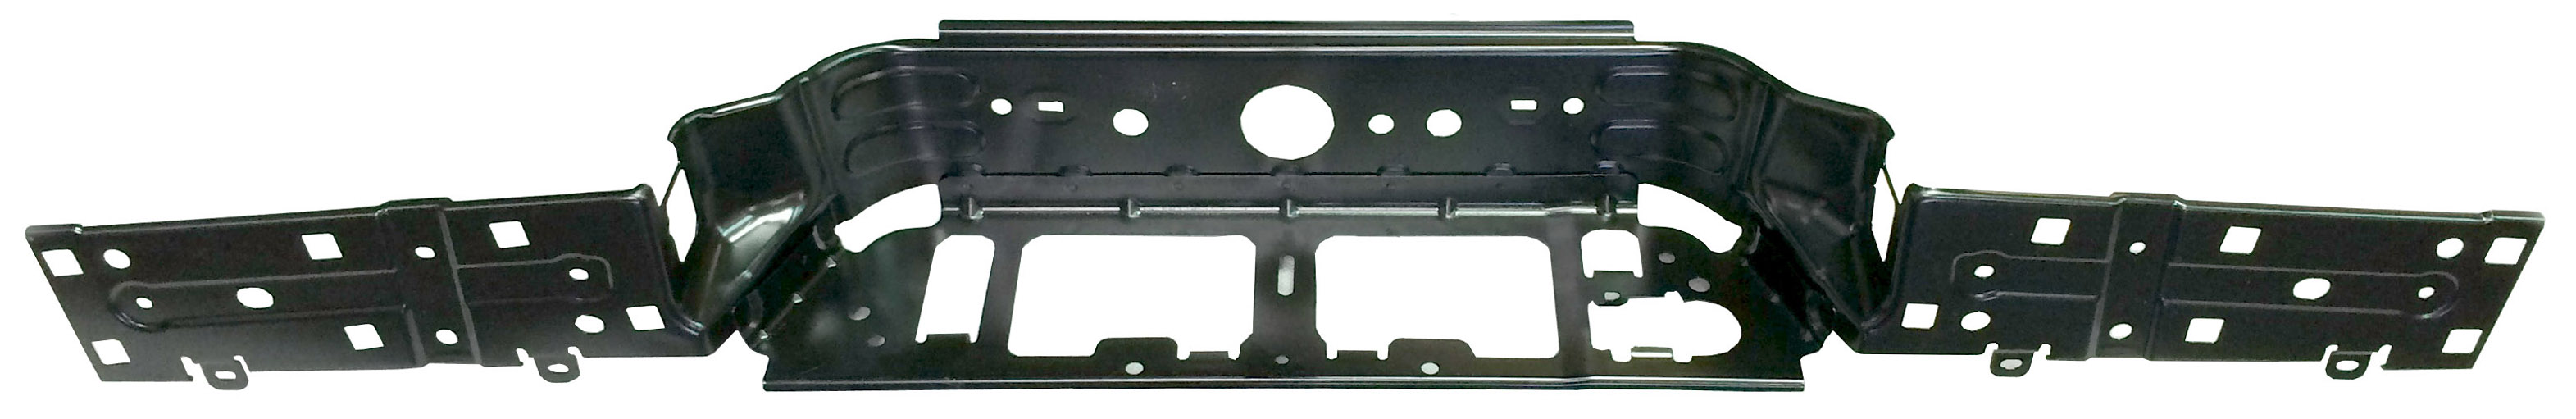 Aftermarket METAL FRONT BUMPERS for TOYOTA - TACOMA, TACOMA,16-23,Rear bumper face bar